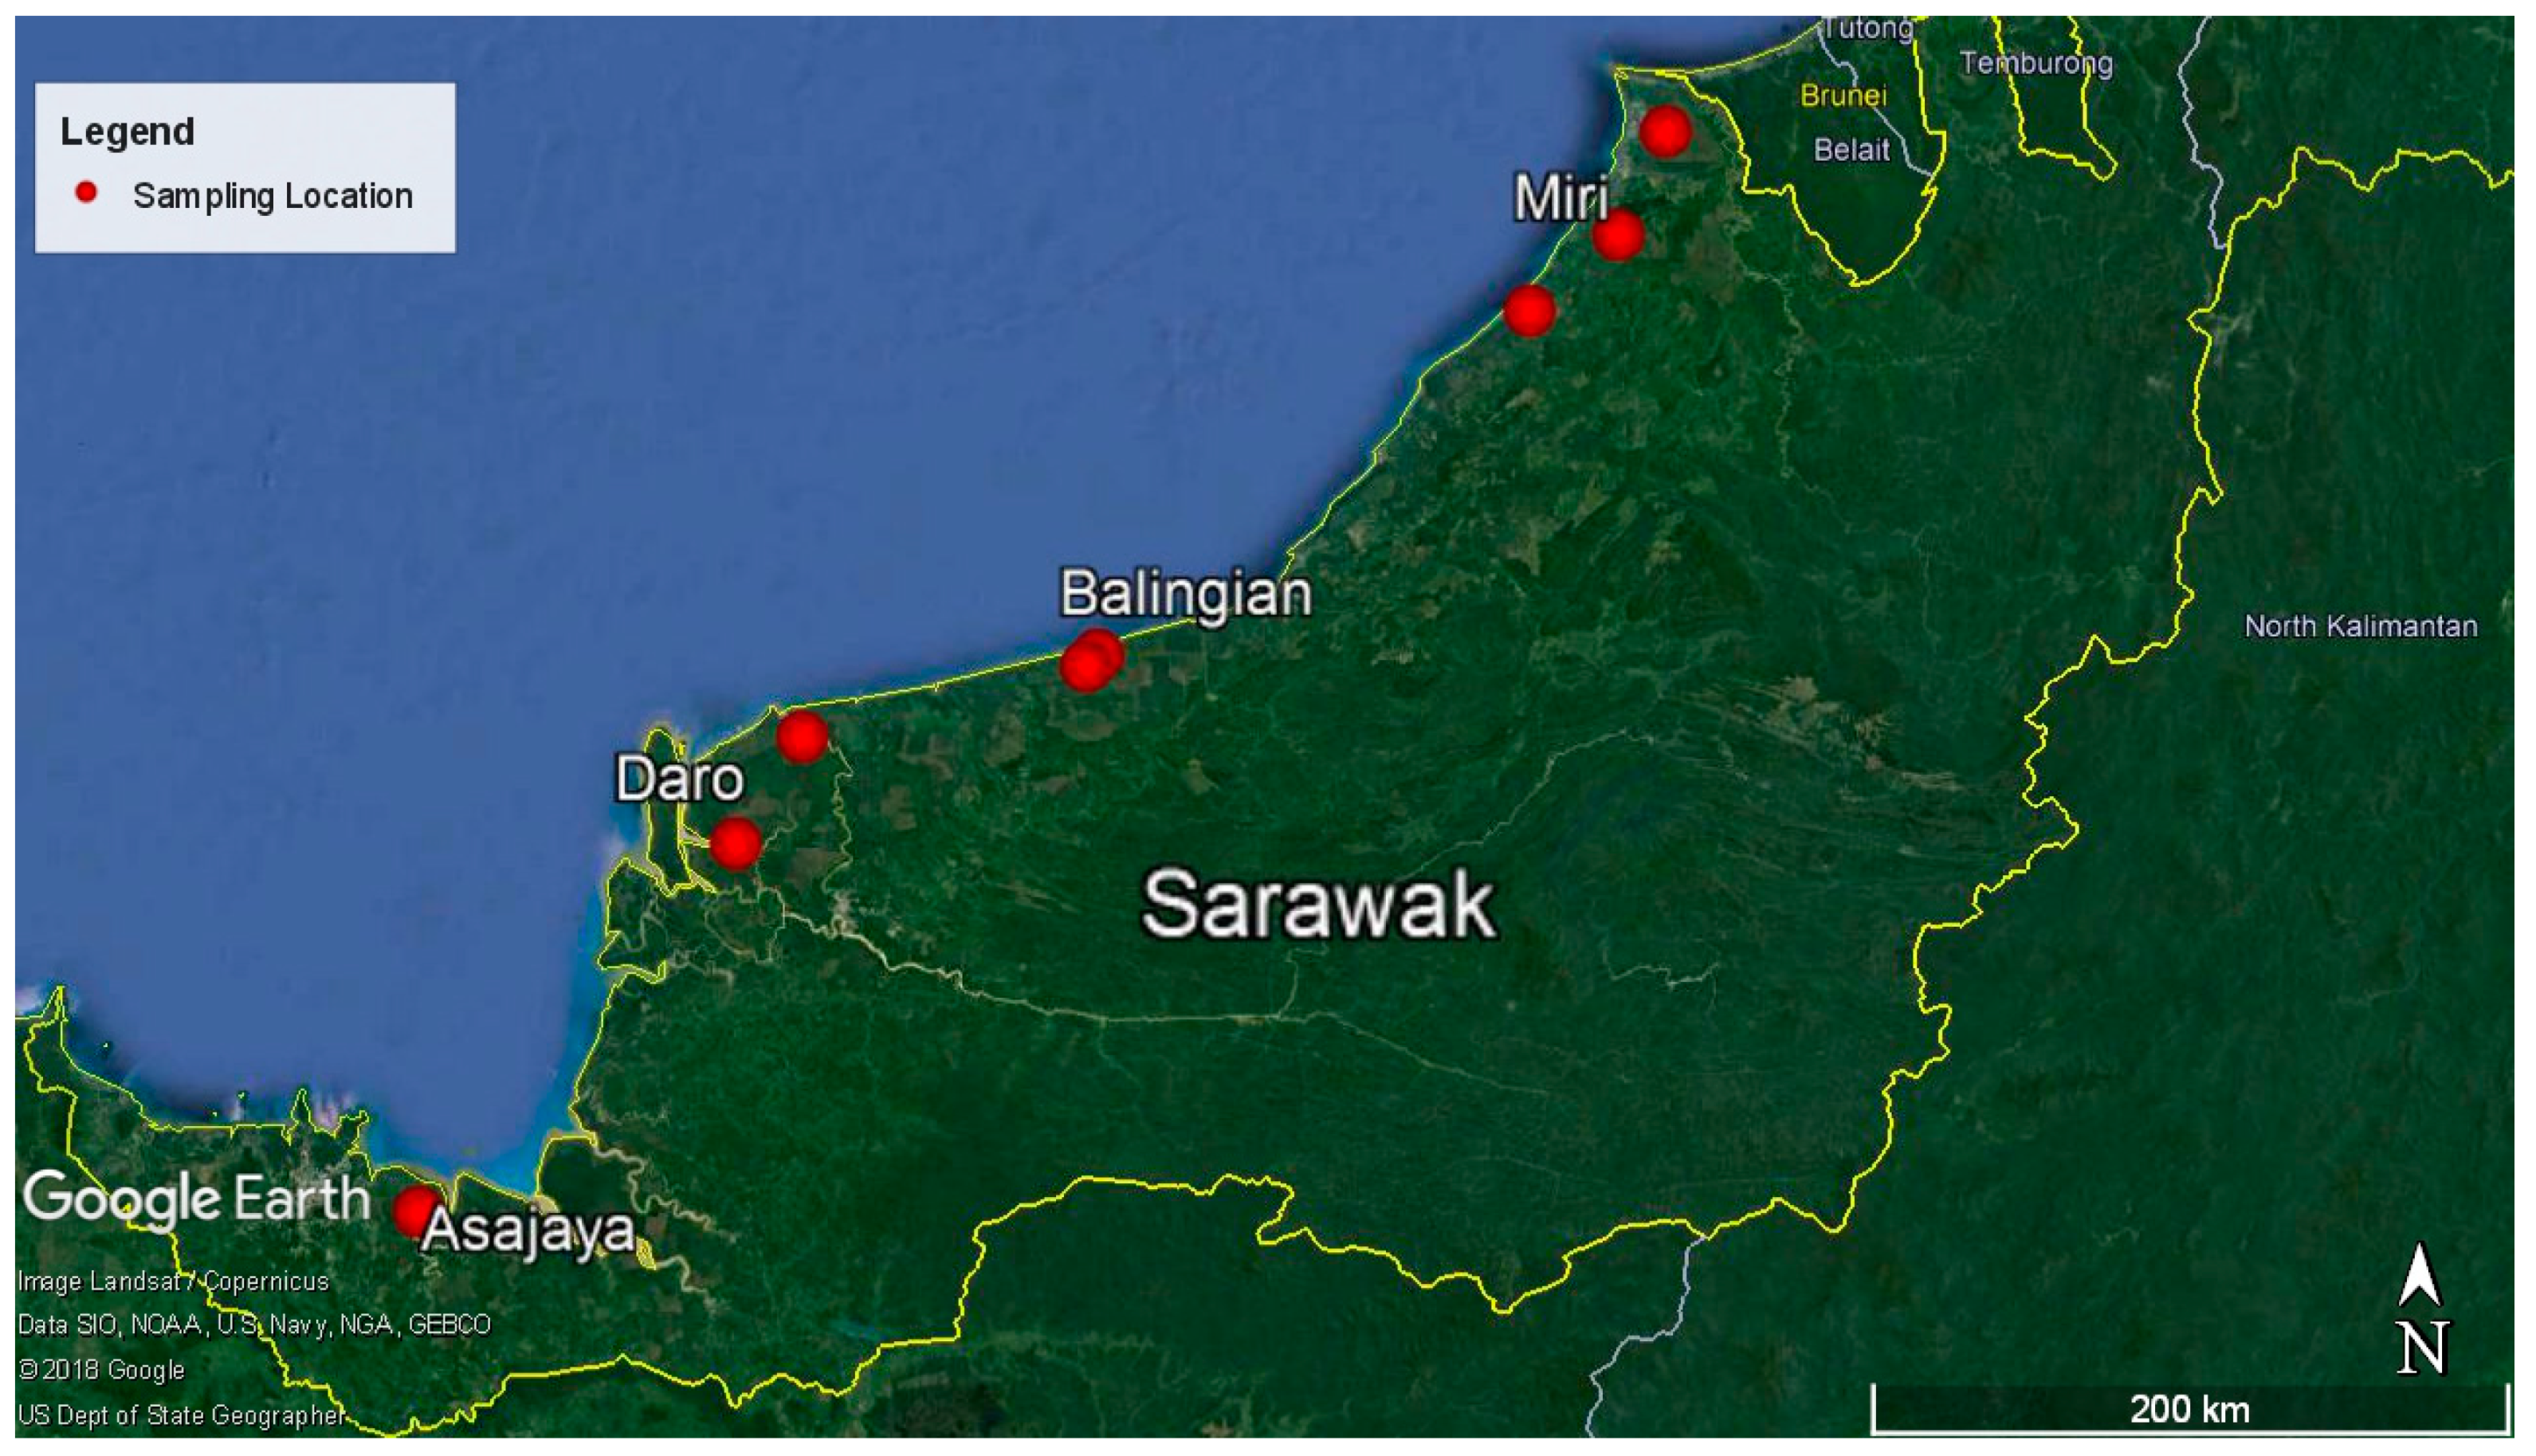 Microorganisms Free Full Text Genetic Diversity And Demographic History Of Ganoderma Boninense In Oil Palm Plantations Of Sarawak Malaysia Inferred From Its Regions